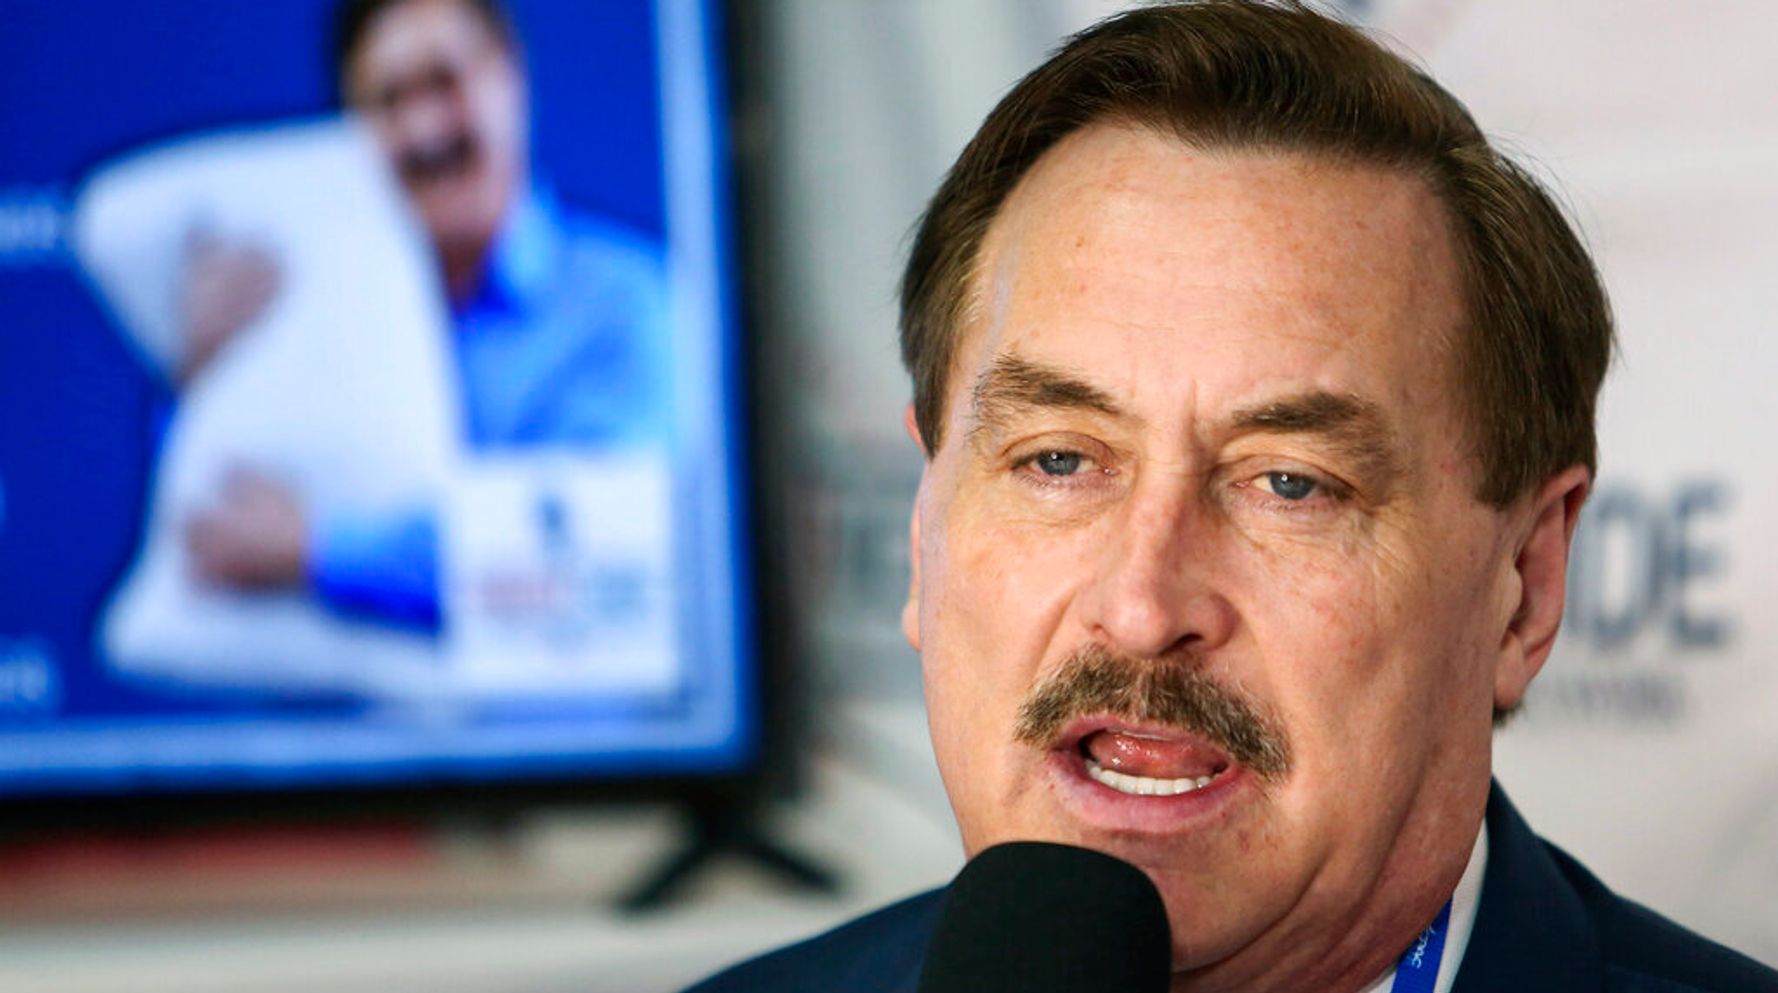 MyPillow CEO Mike Lindell Claims He Was Attacked At Cyber Symposium